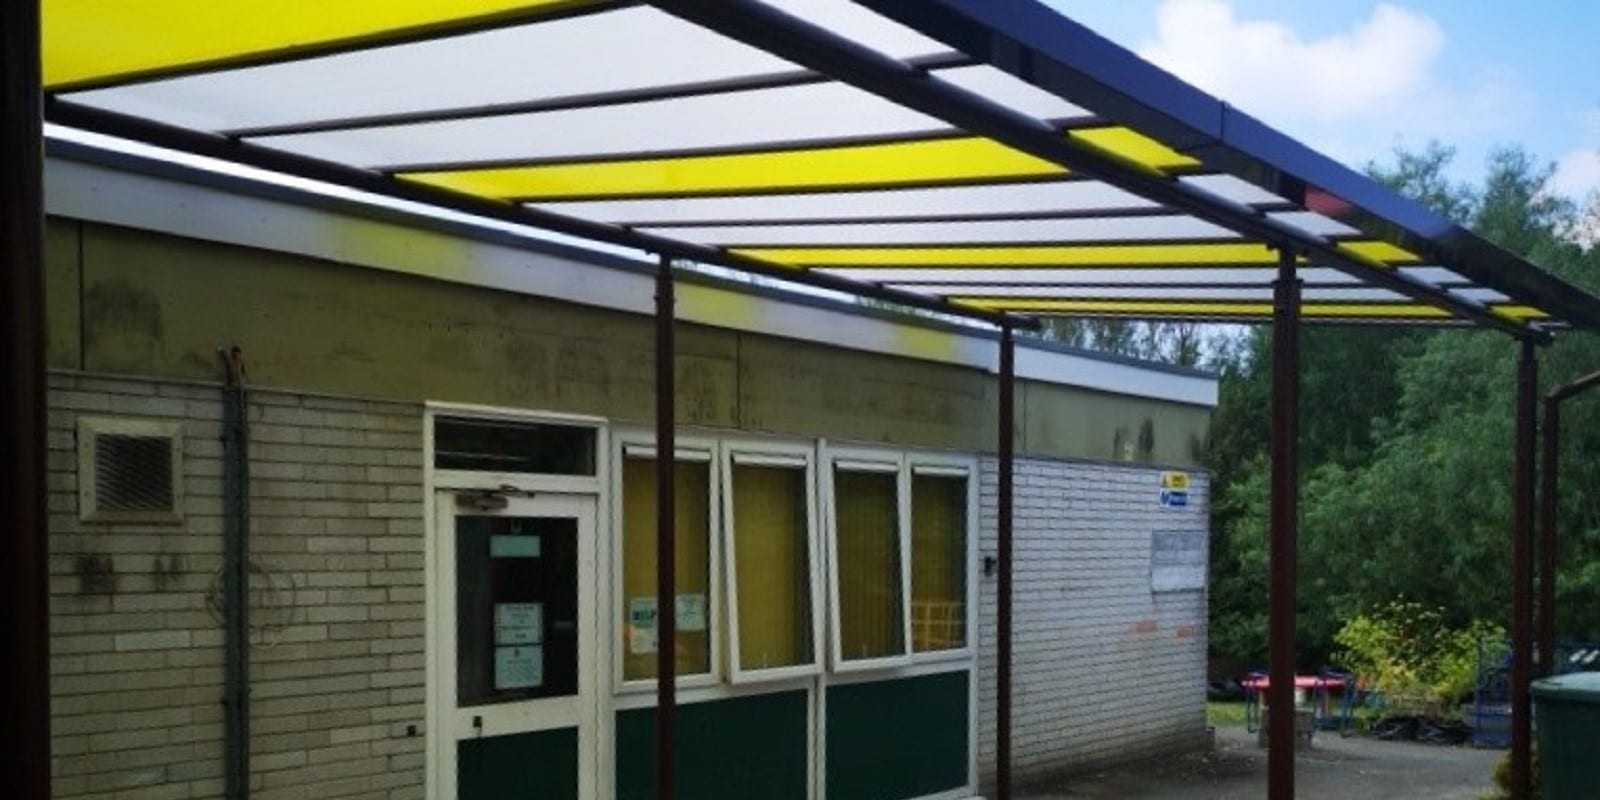 Canopy we made for Chaddlewood Primary School